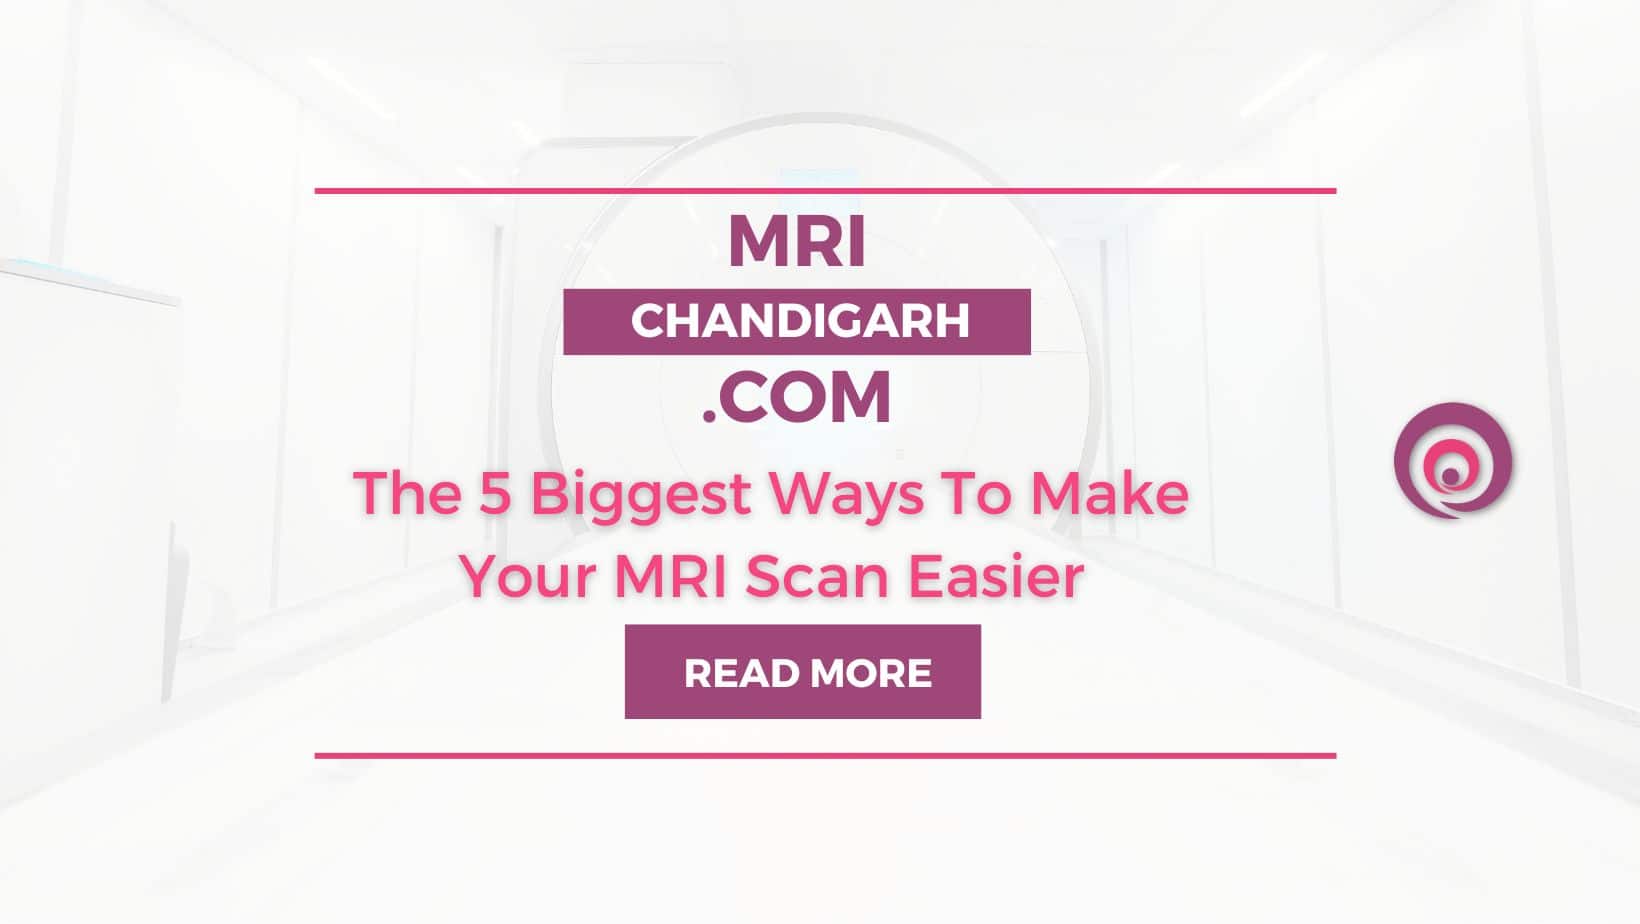 The 5 Biggest Ways To Make Your MRI Scan Easier